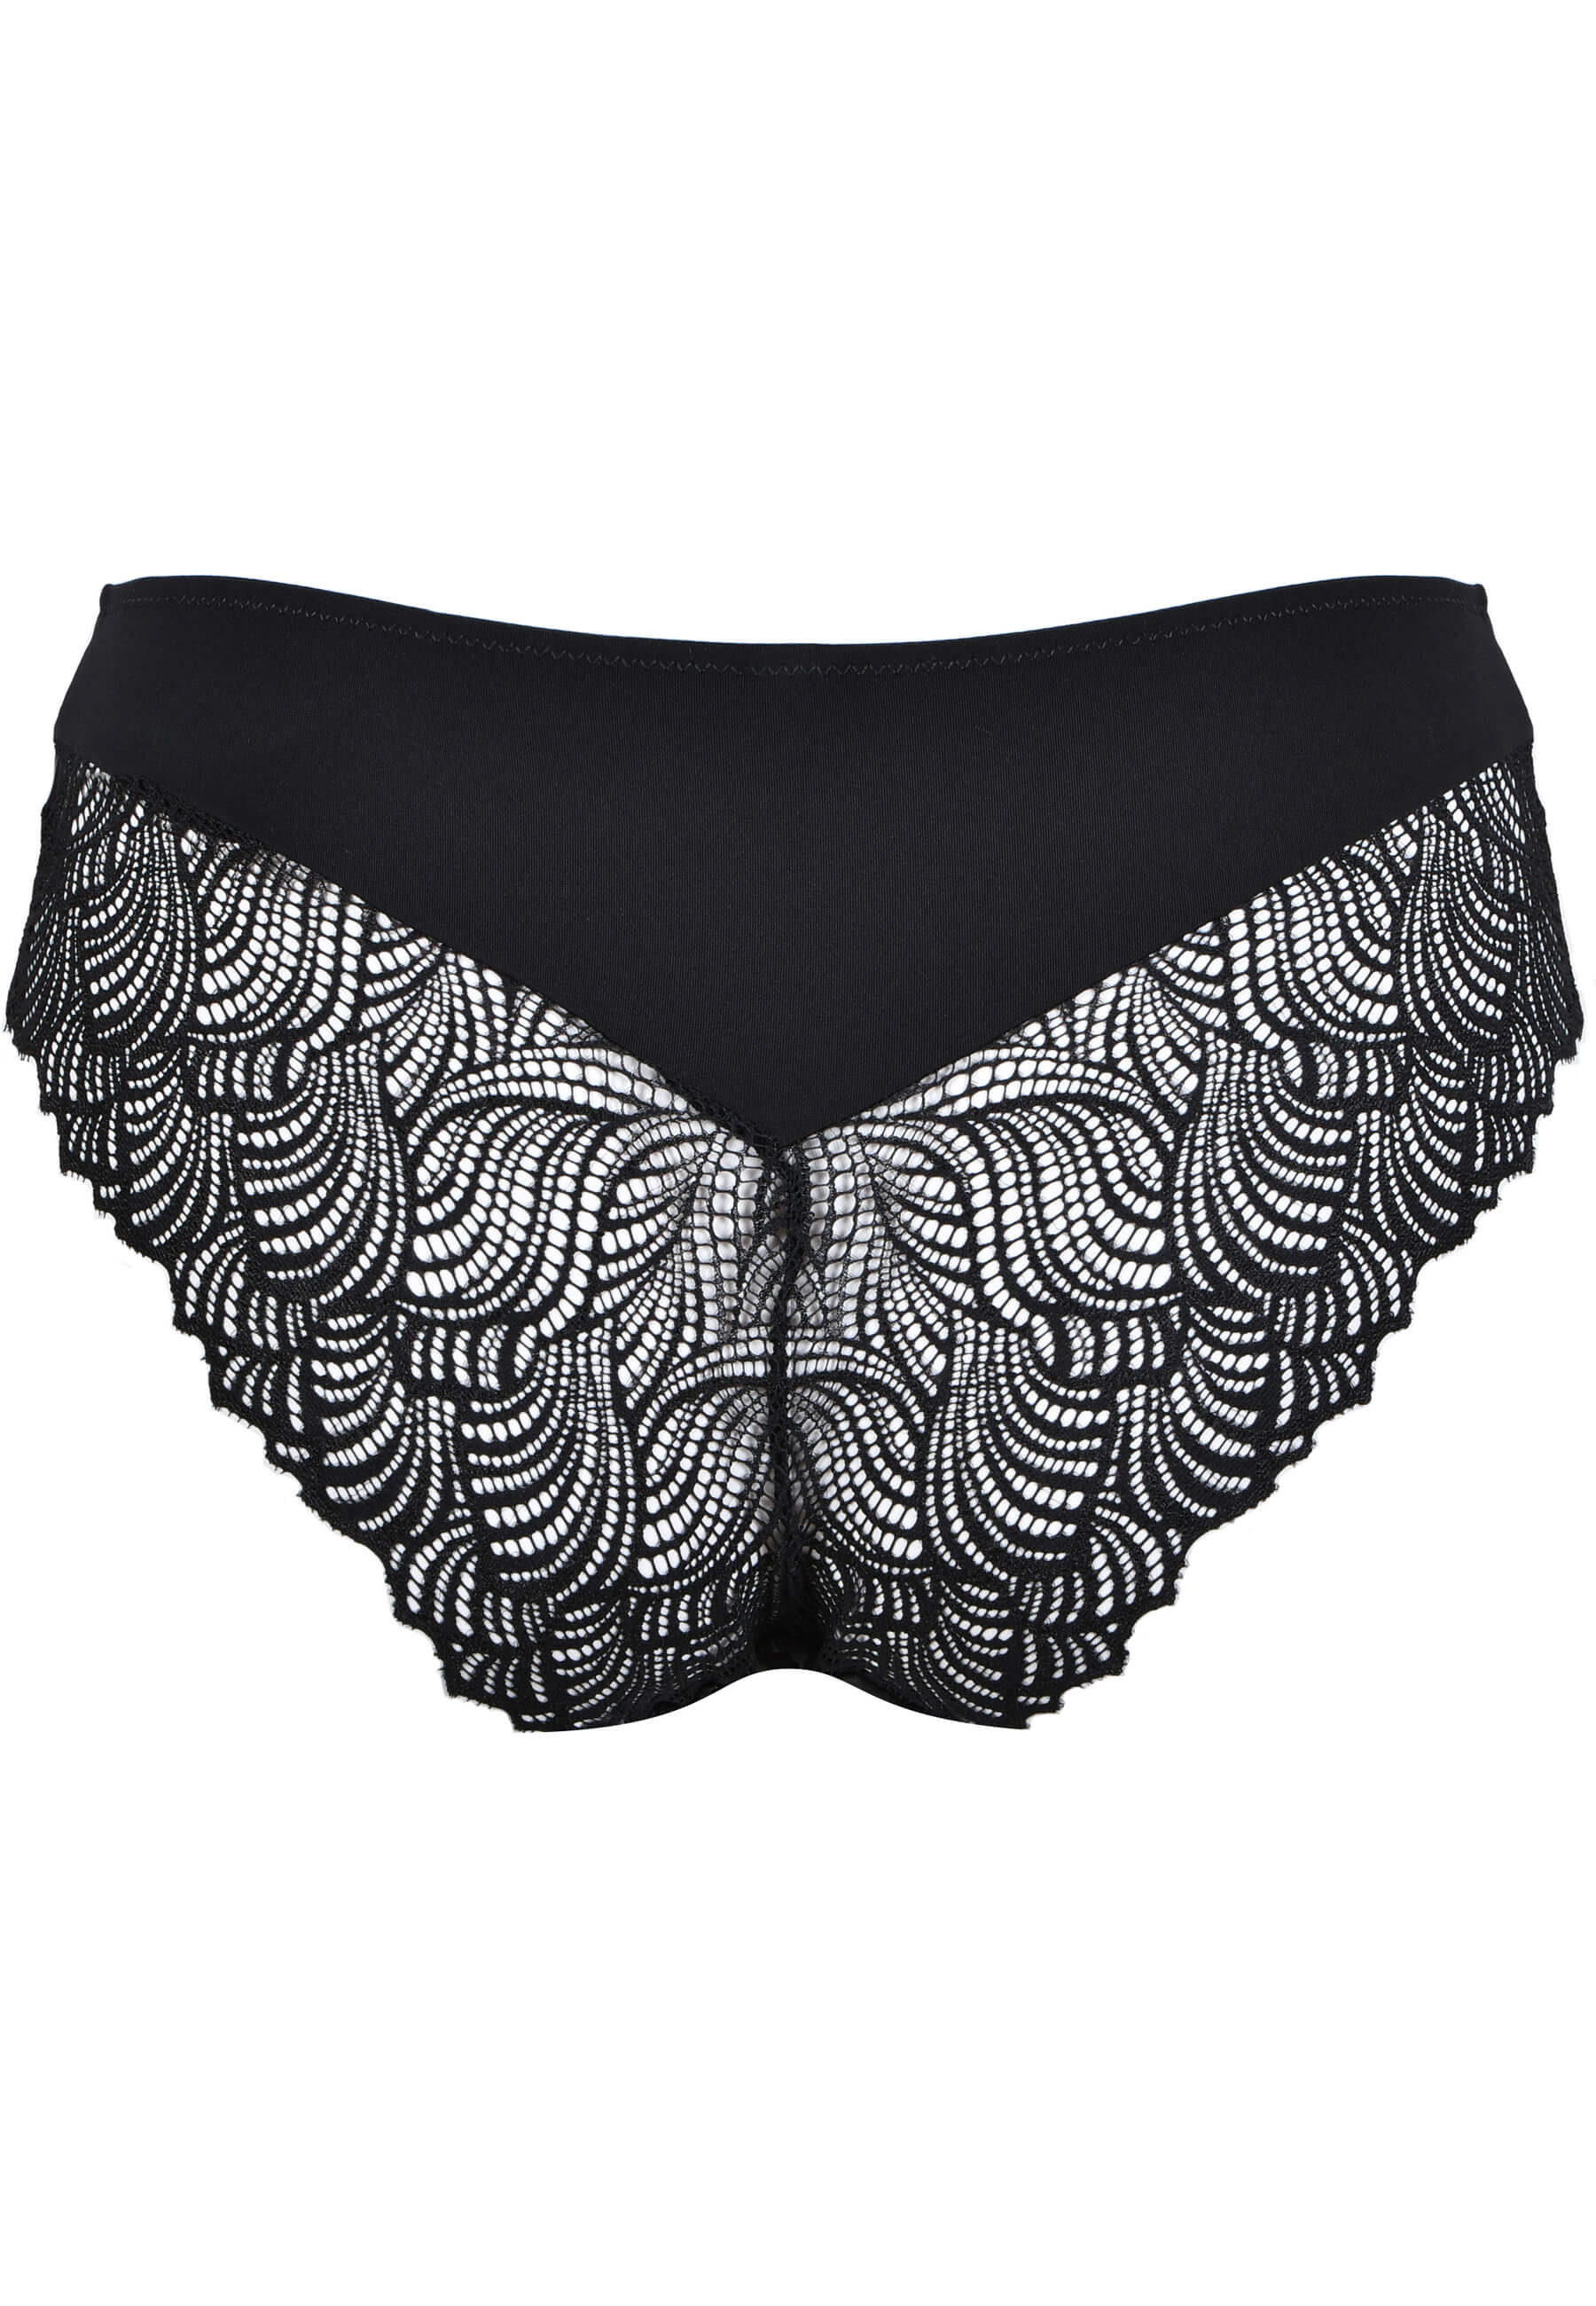 Brief with Lace Details - Black